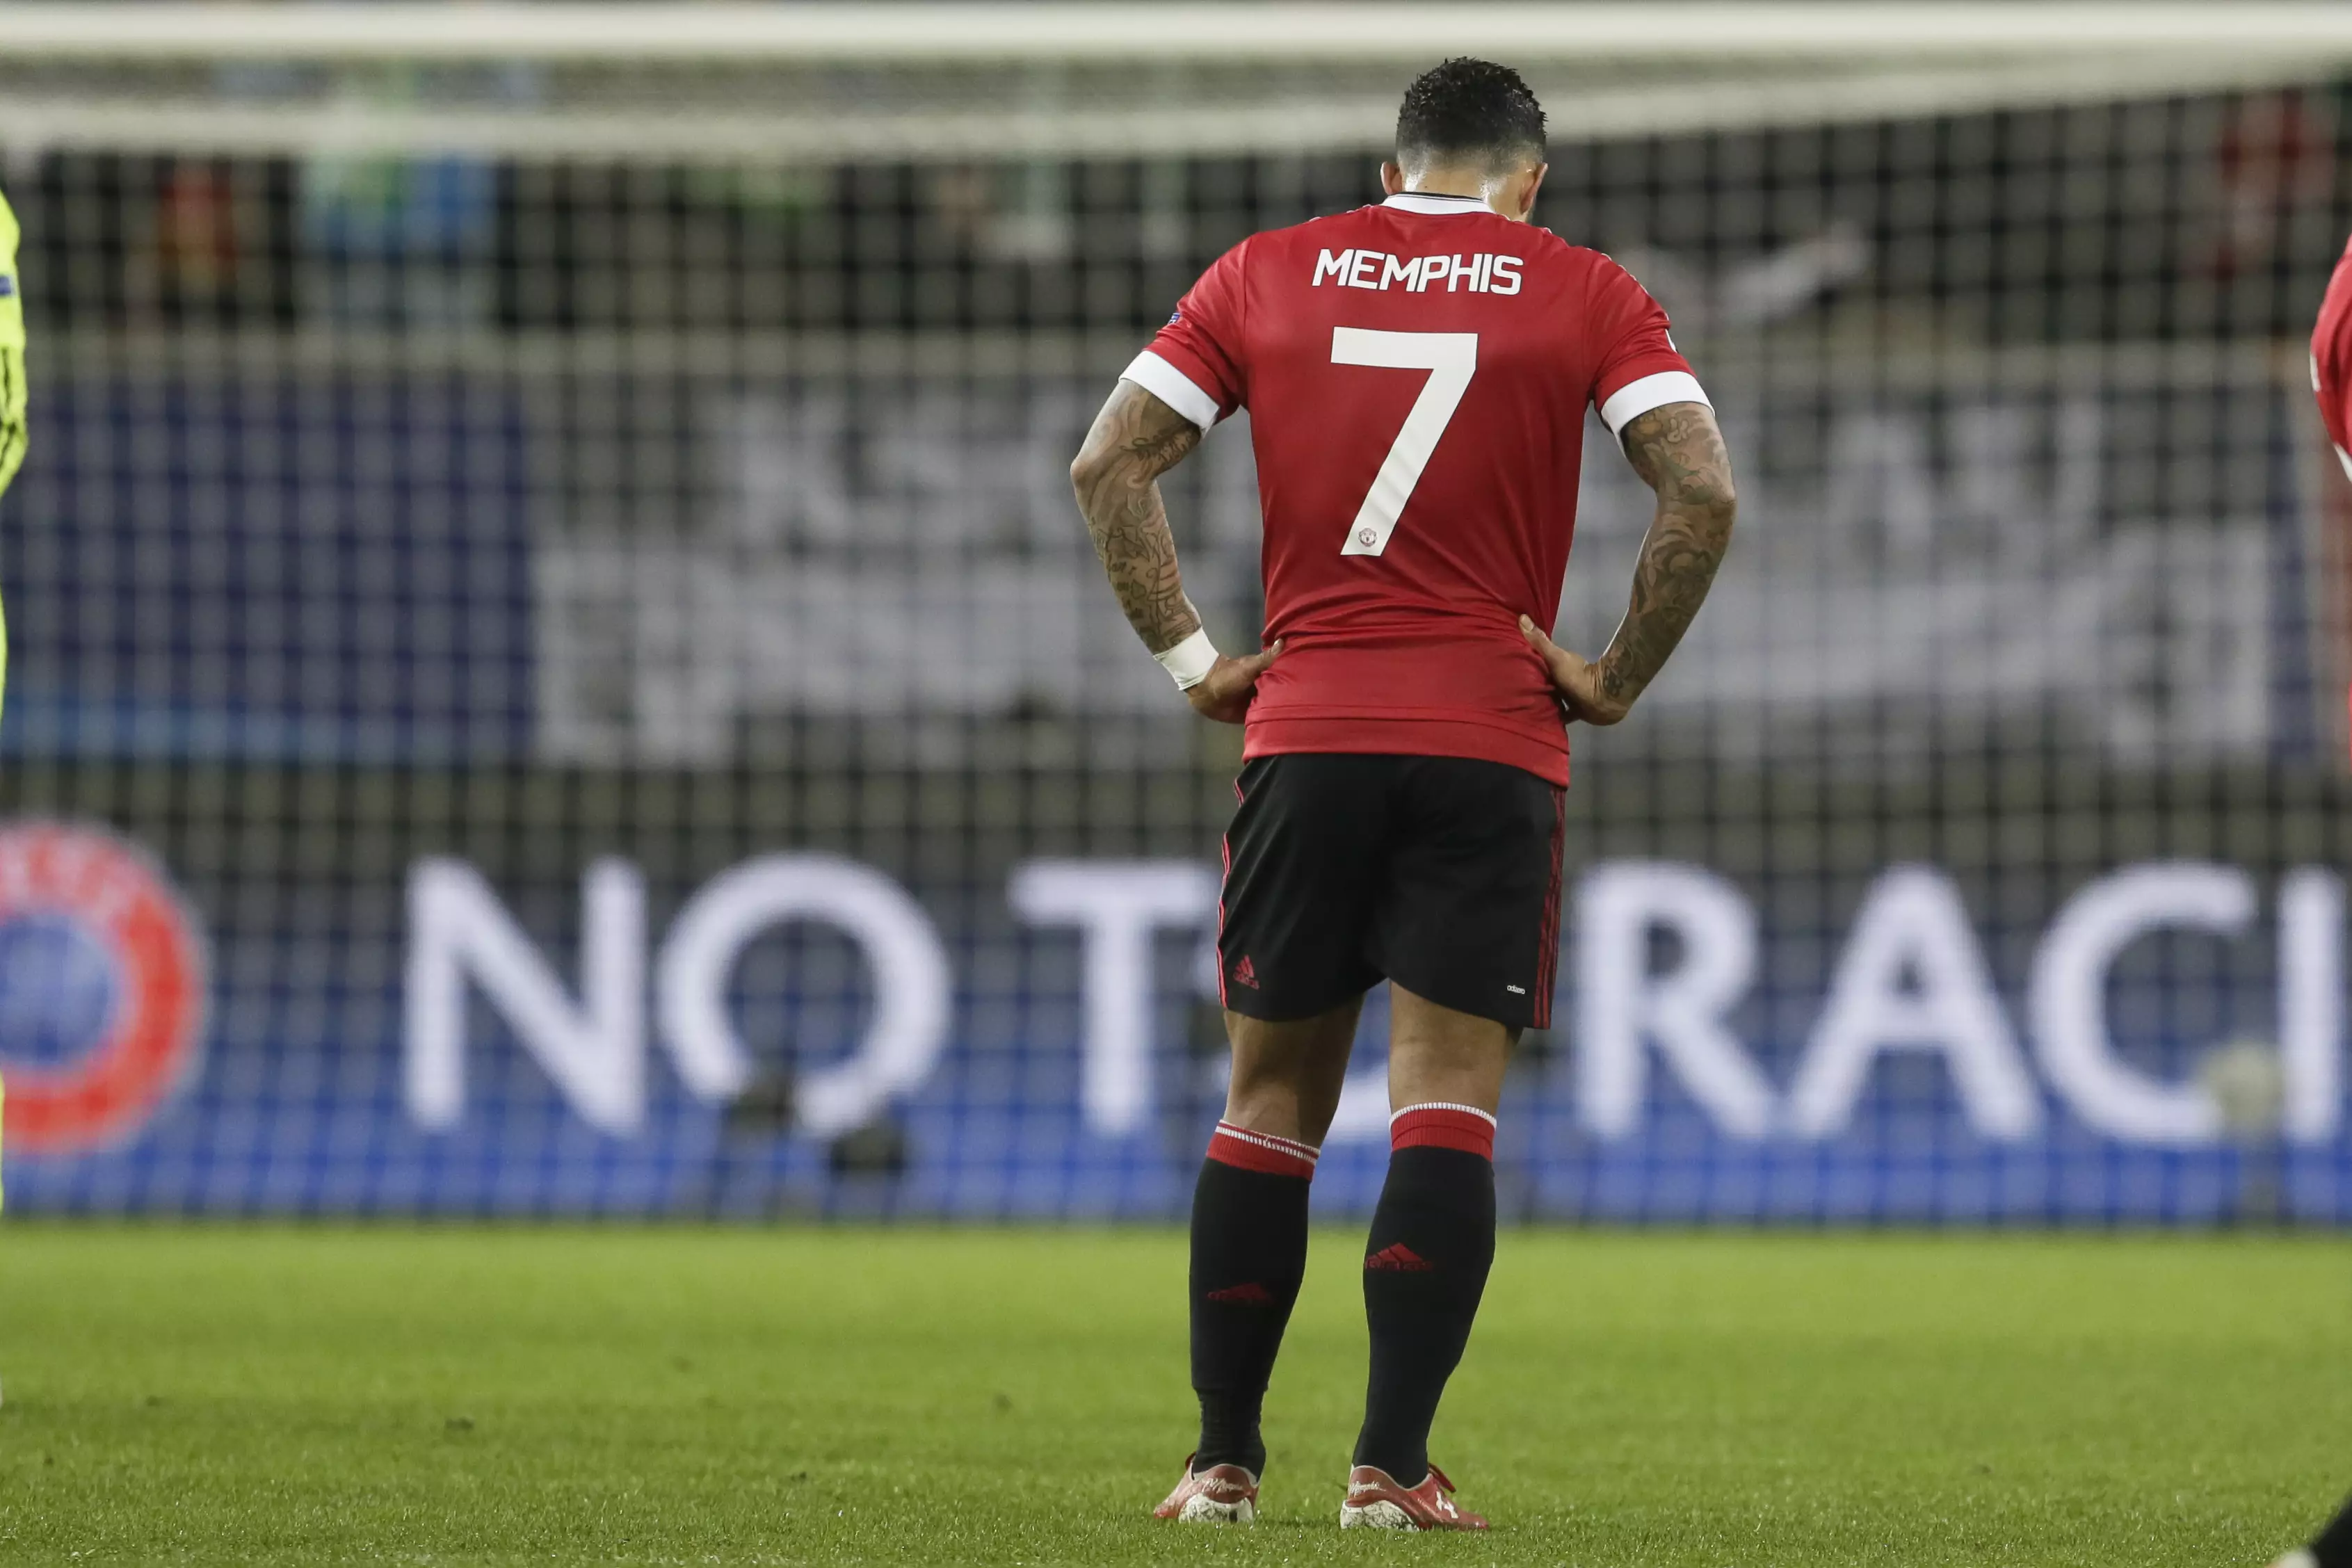 WATCH: Memphis Misses A Sitter During Manchester United Friendly